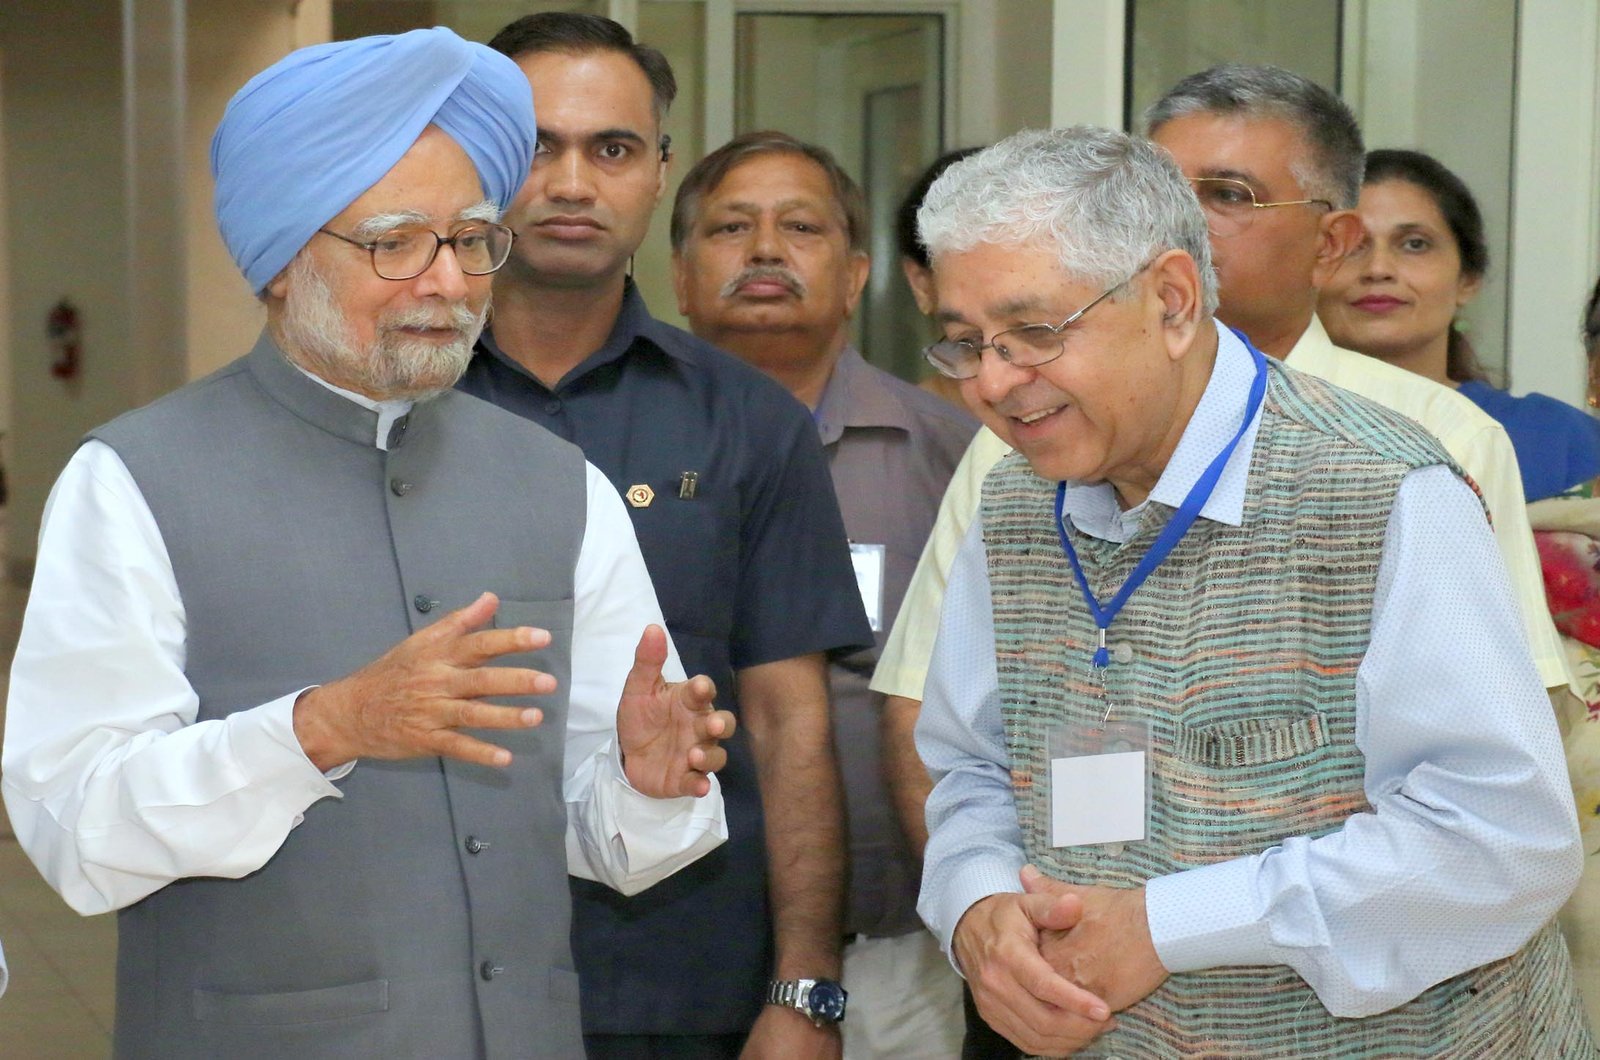 Dr. Manmohan Singh Roots For Equality To Save Democracy, Lifeinchd